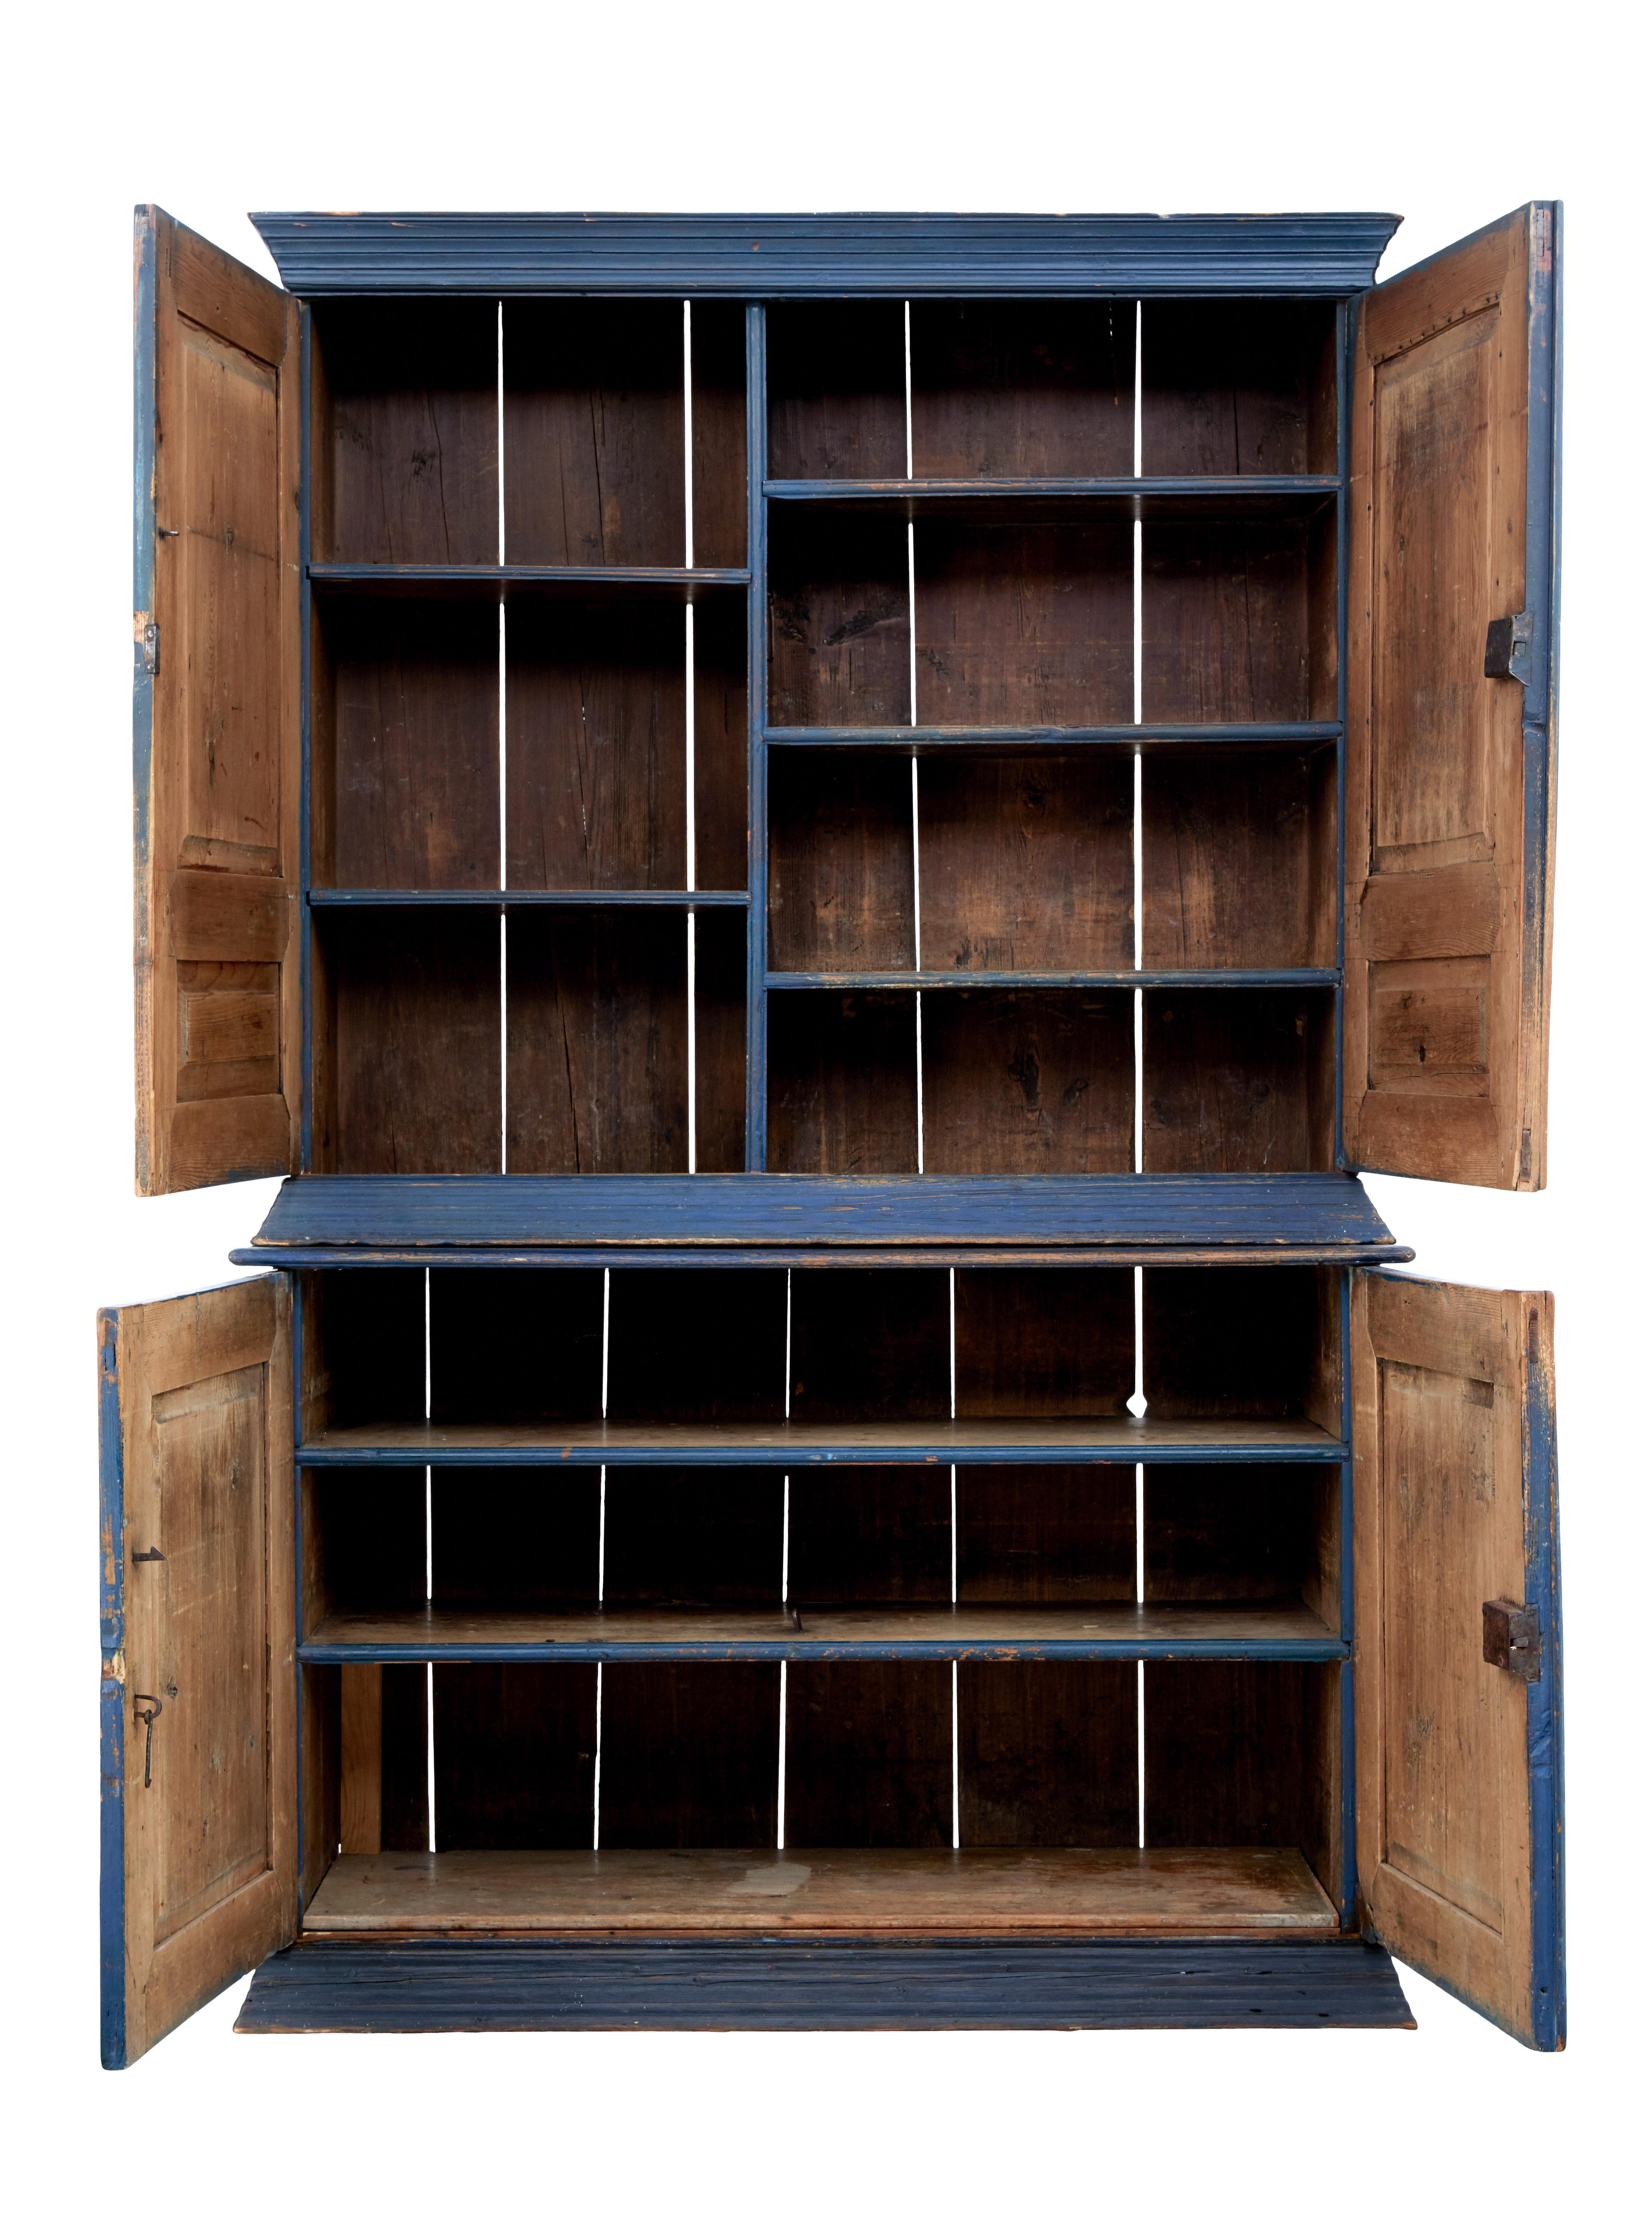 Mid-19th century Scandinavian painted housekeepers cupboard, circa 1860.

Large 2 part cupboard painted in original rustic blue. Top half with double doors that open to reveal an interior with a vertical partition and 5 fixed shelves. Bottom